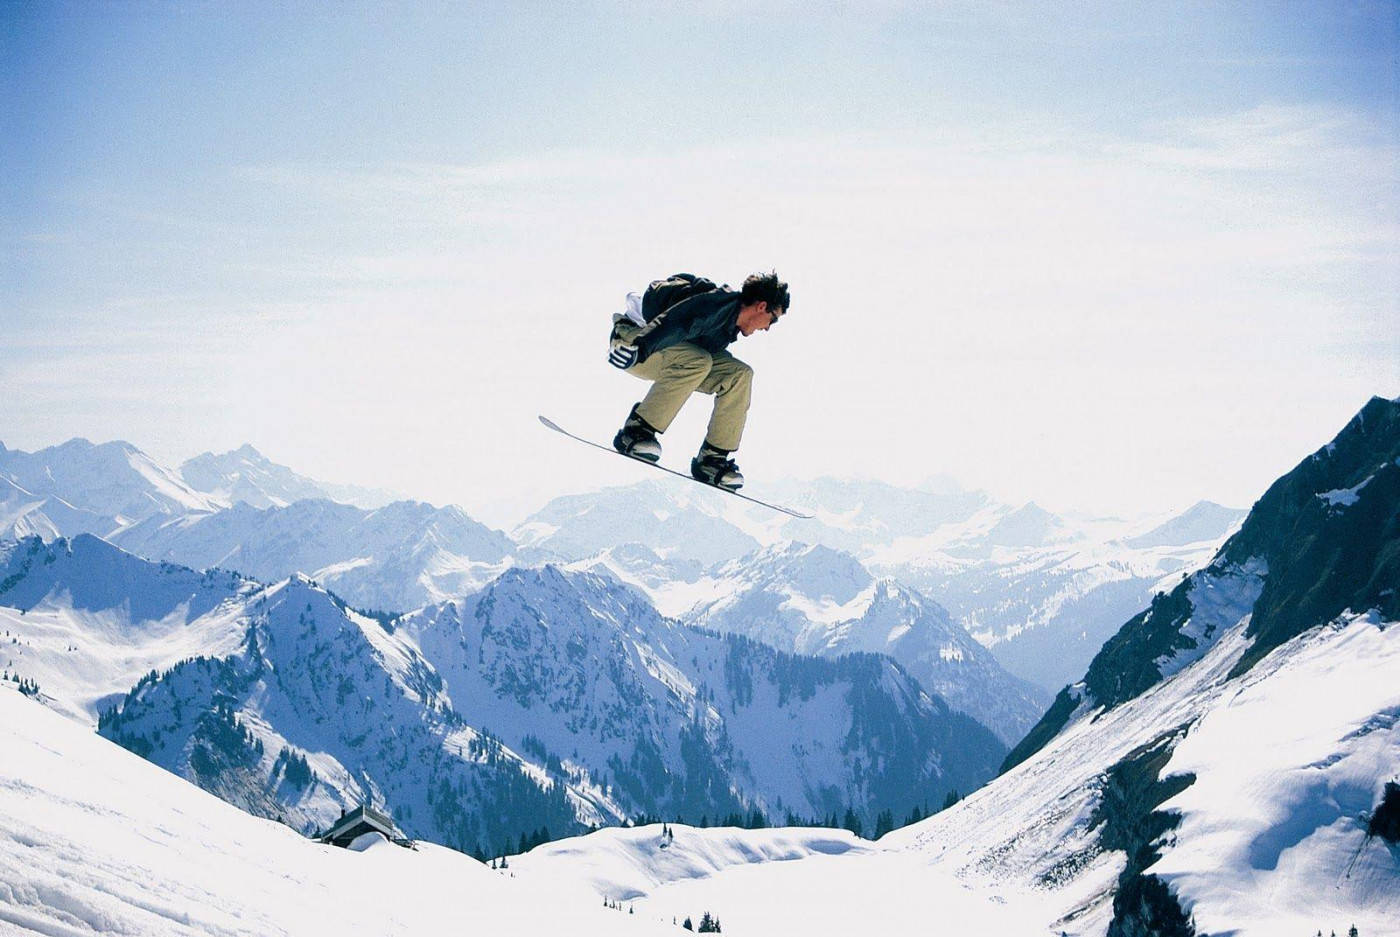 Man With Snowboard Descending With Mountainous Backdrop Background